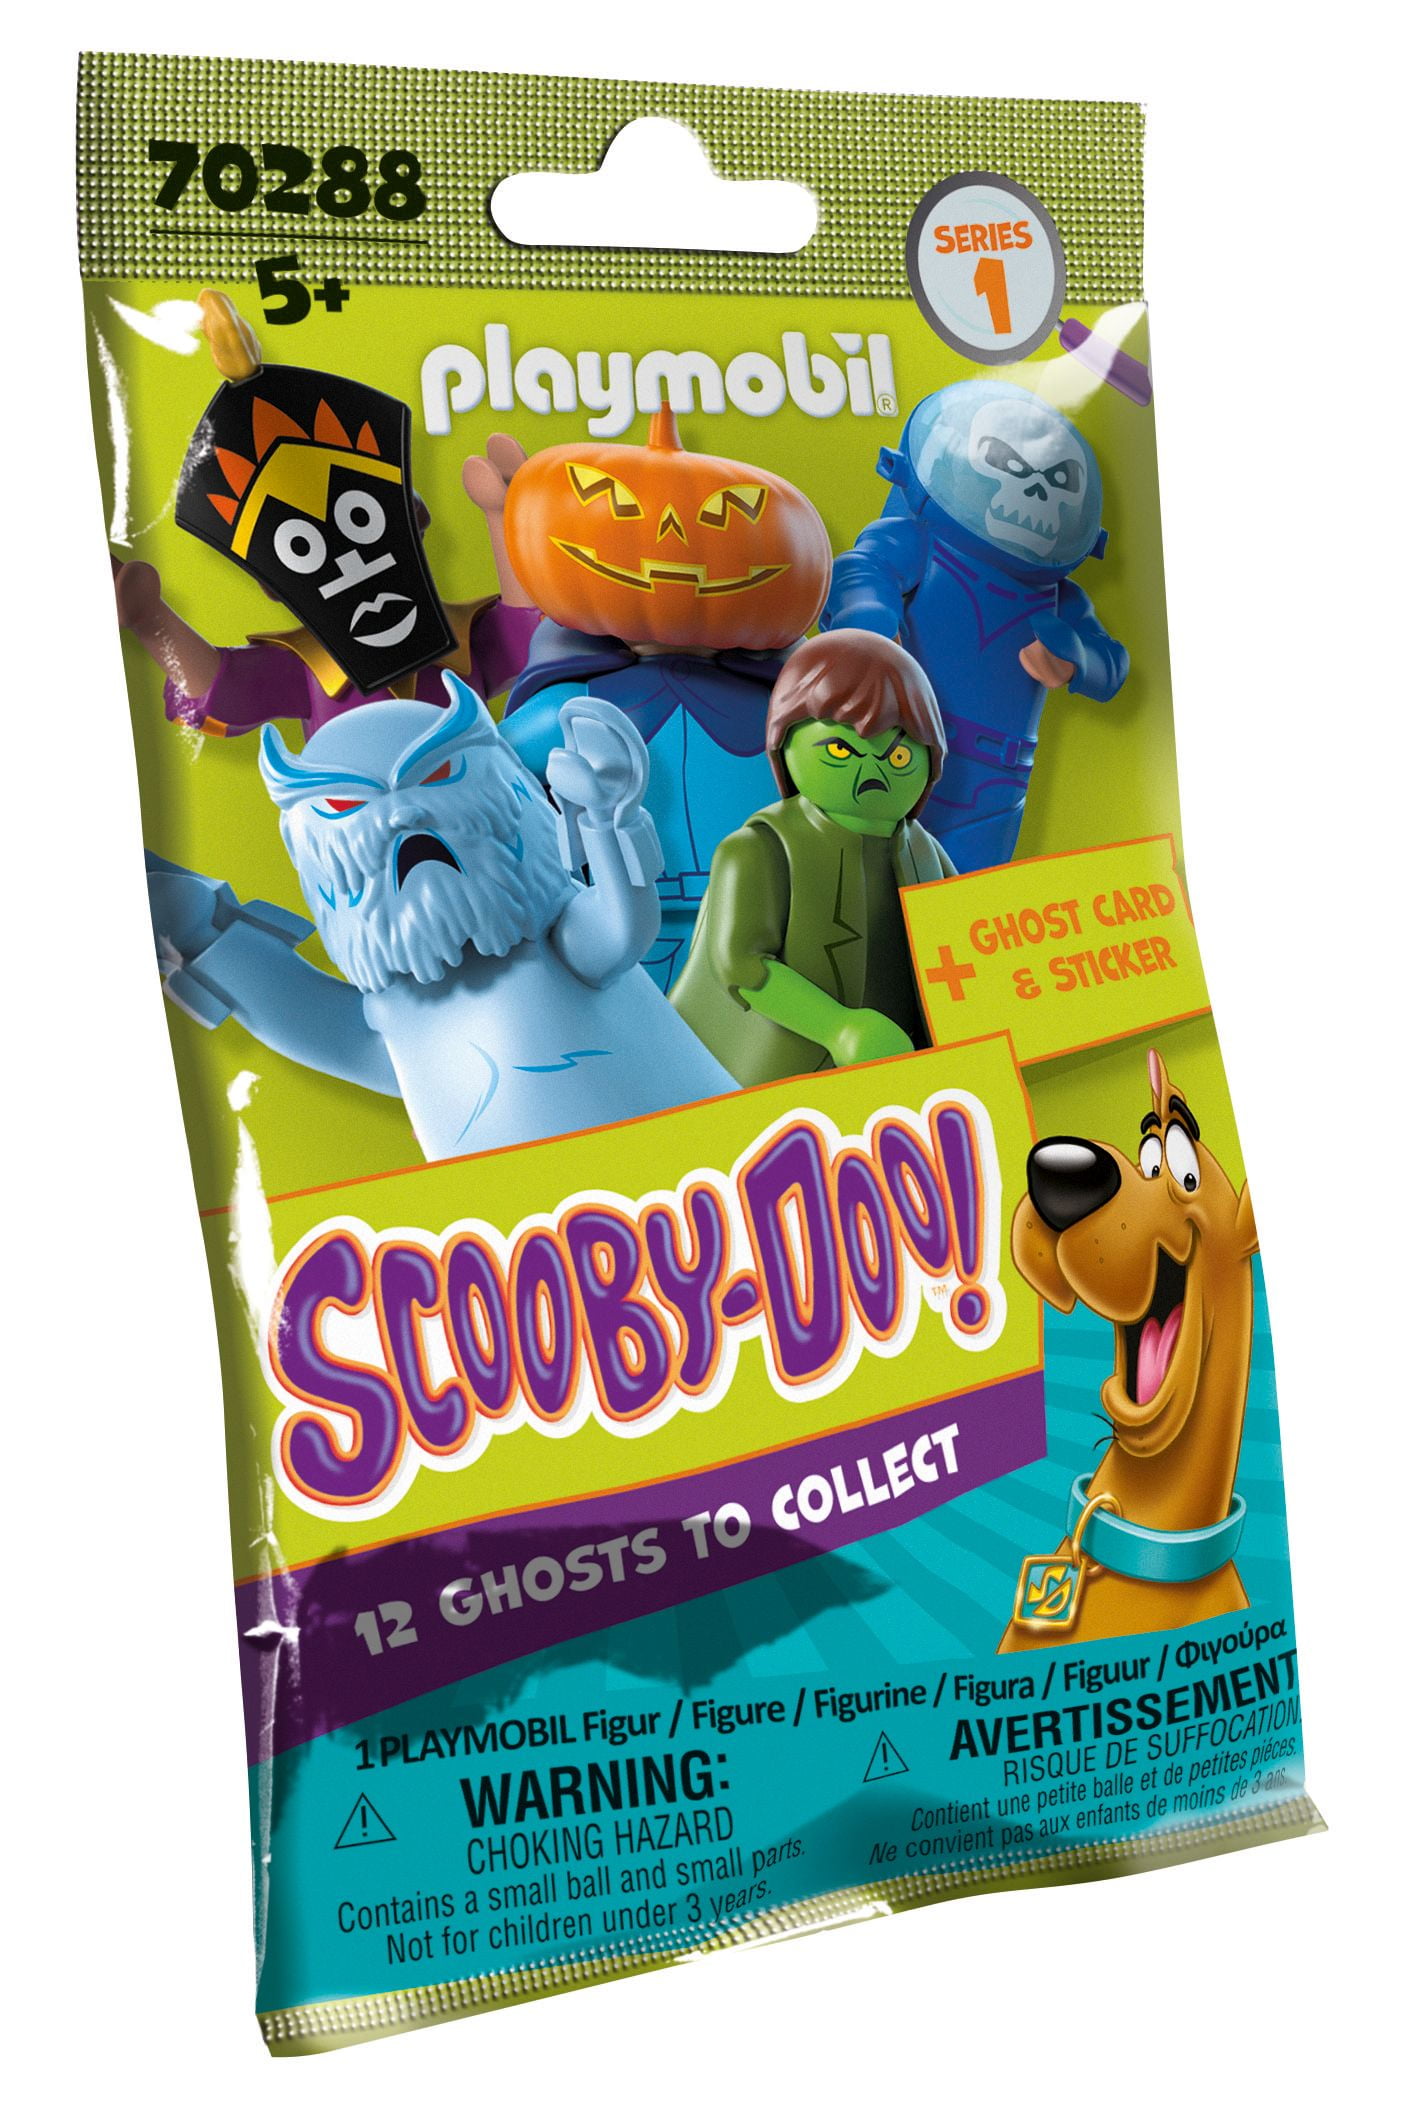 PLAYMOBIL SCOOBY-DOO GHOST FIGURES SERIES 1 +STICKER POSTER+CASE COMPLETE SET 